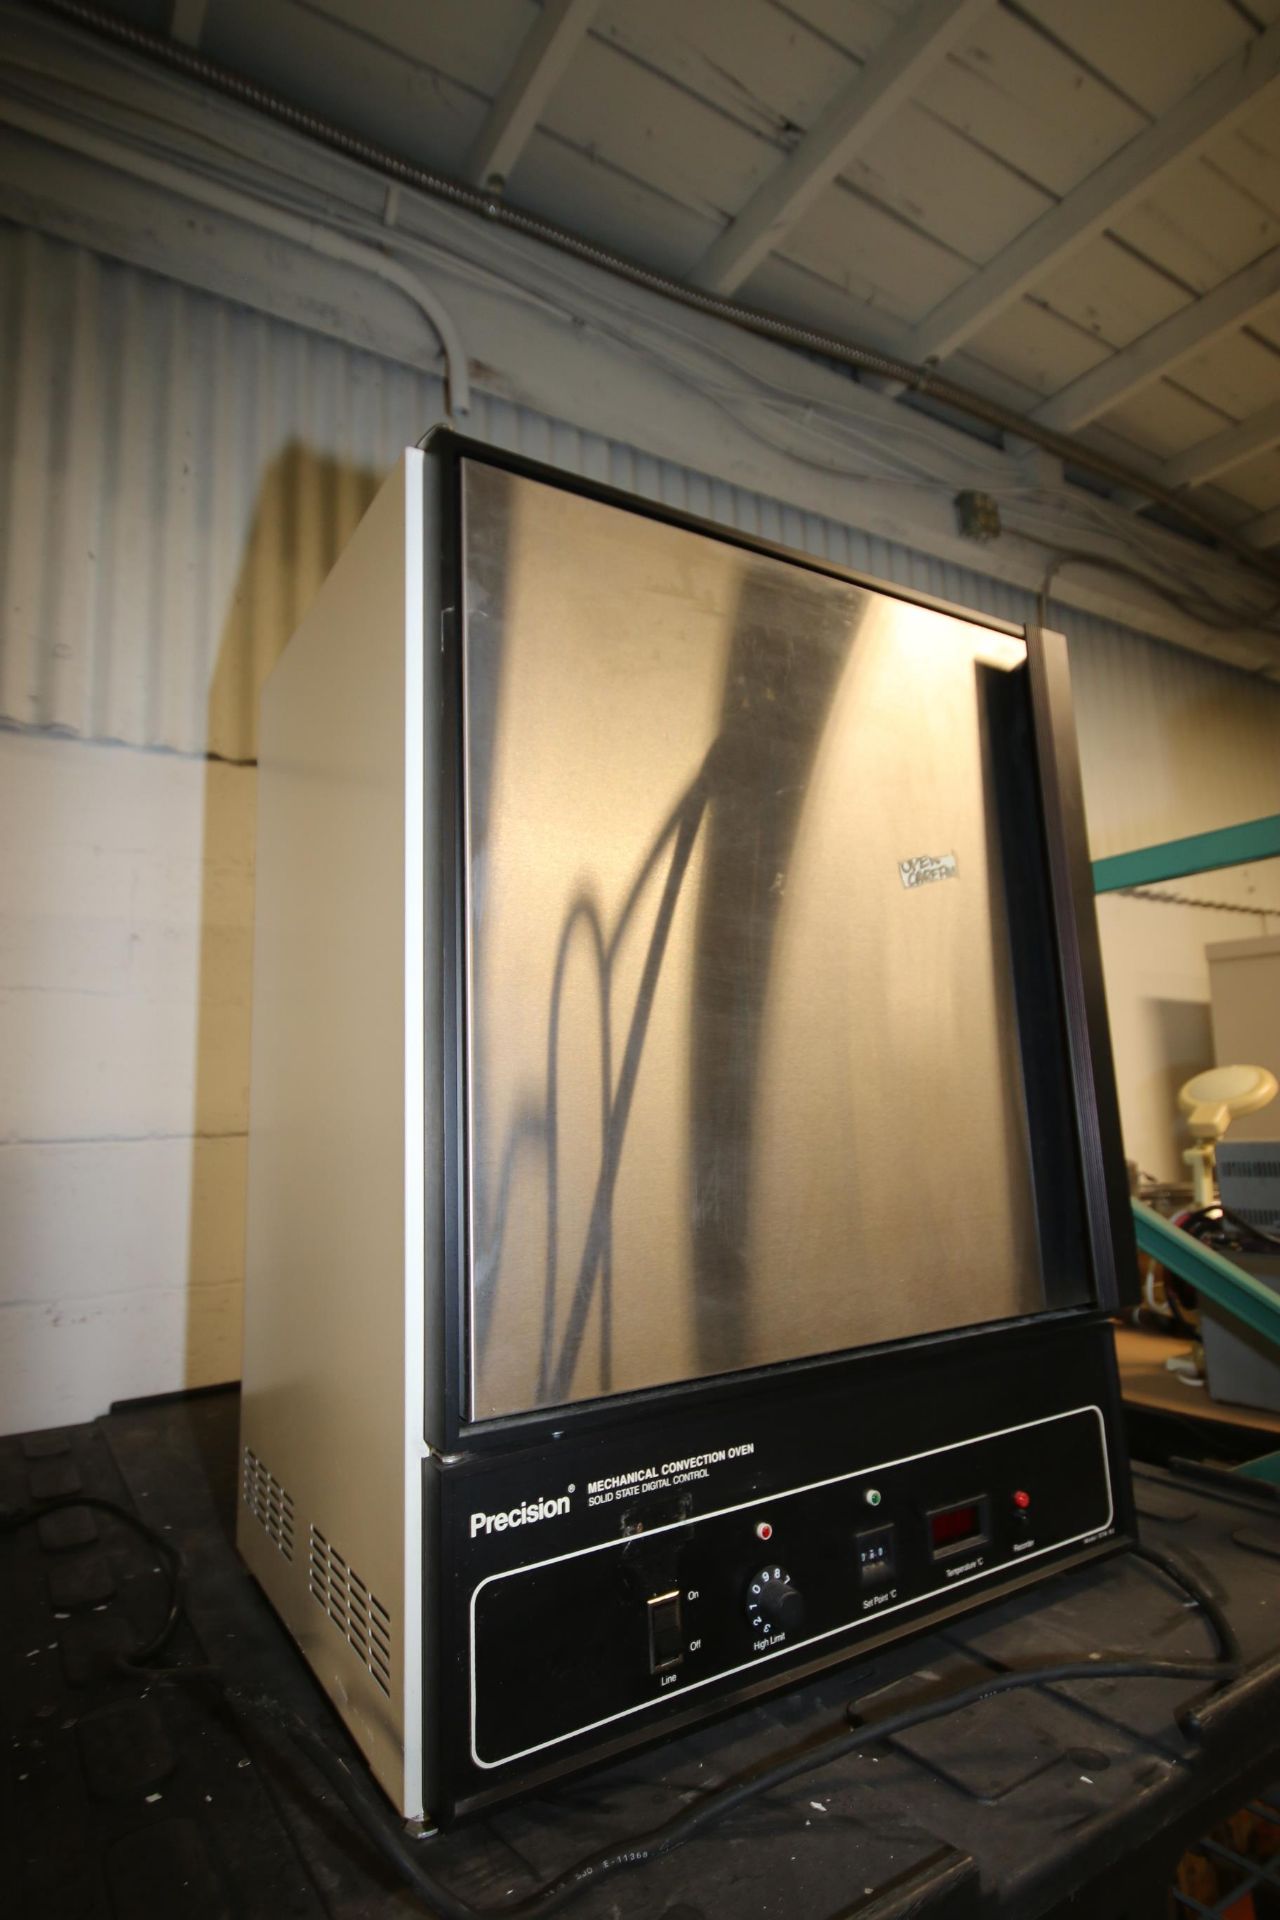 Precision S/S Mechanical Convection Oven, M/N STM80, S/N 11AW-5, CAT. No. 1551-11, Temp.: 225C, with - Image 5 of 5